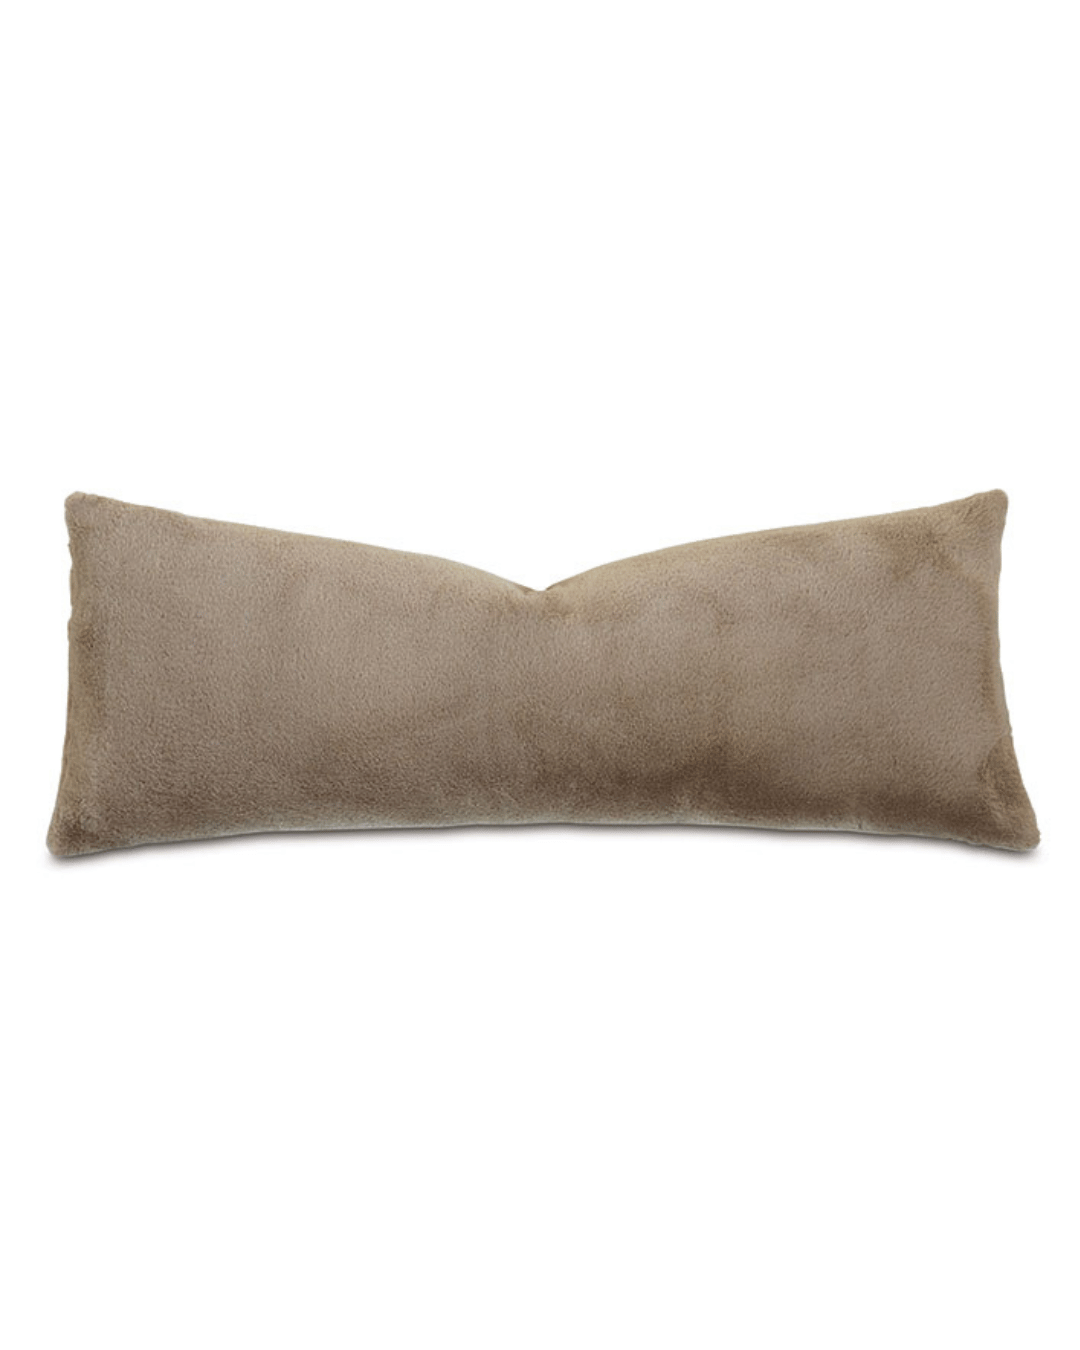 A rectangular, bone-shaped Adri Faux Fur Pillow in a light beige color, inspired by the serene aesthetics of Scottsdale, Arizona, laid on a plain white background. (Brand Name: Eastern Accents)